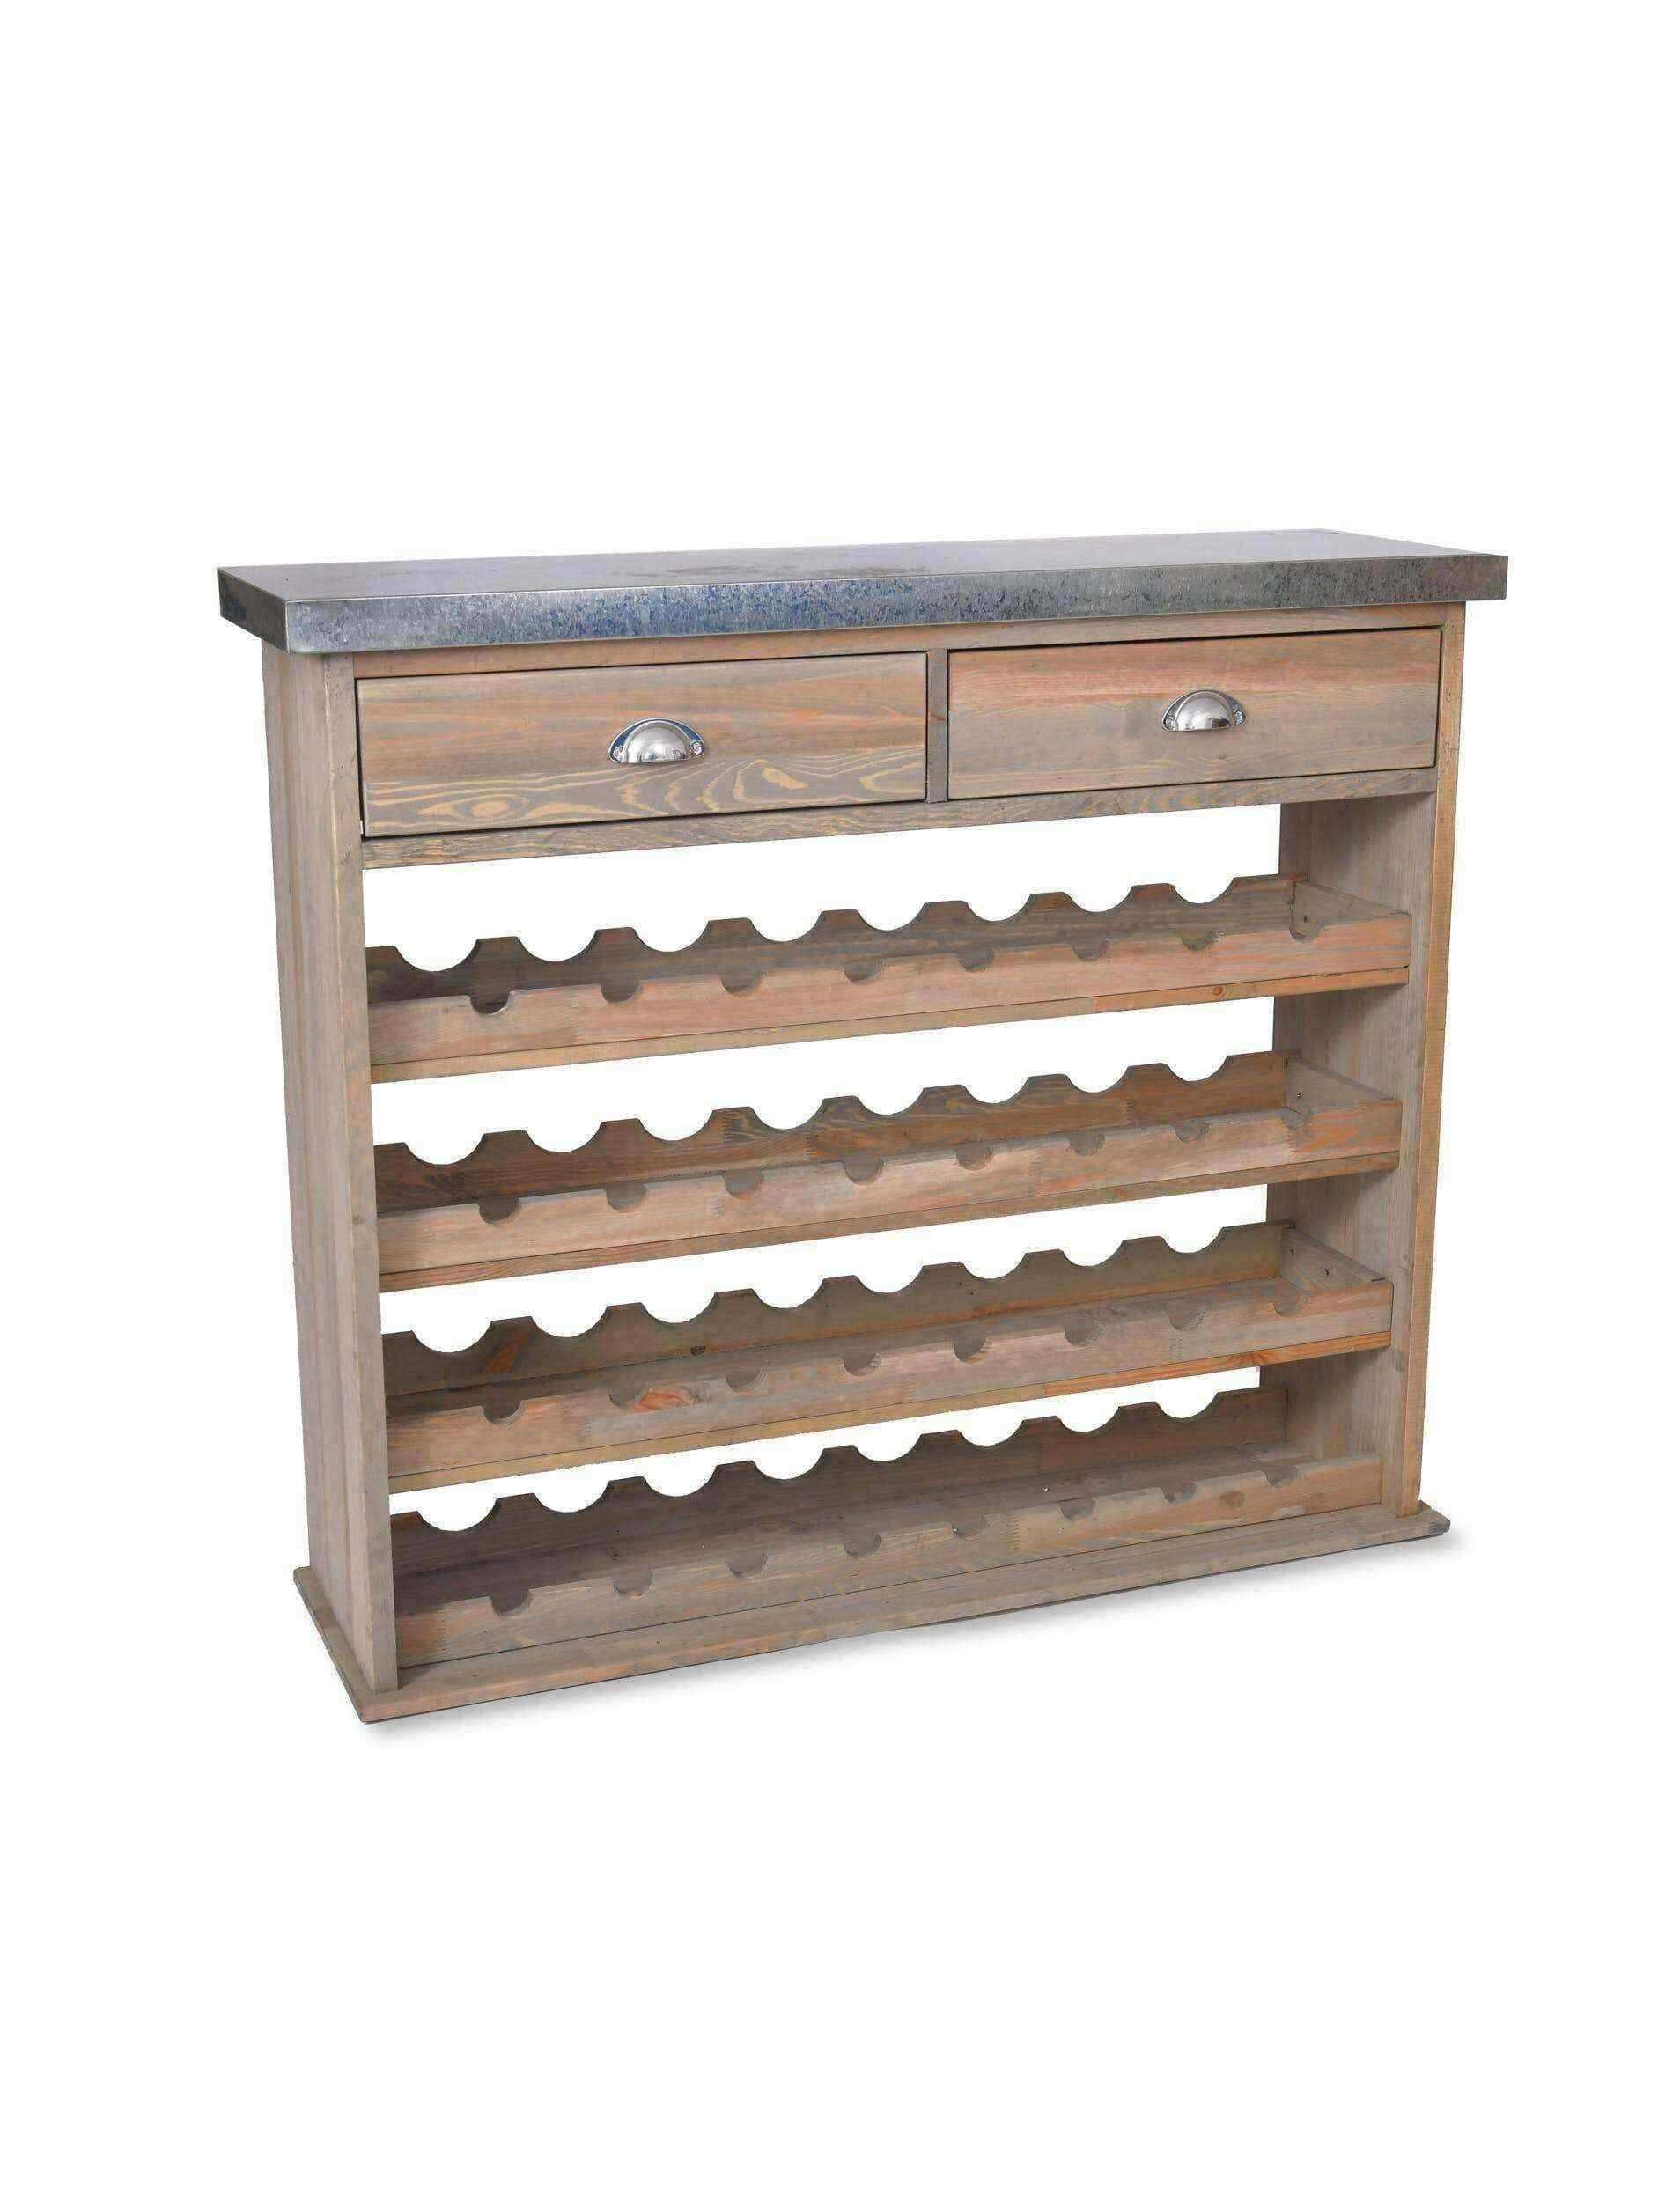 Rustic Wood & Metal Topped Wine Store Console - The Farthing